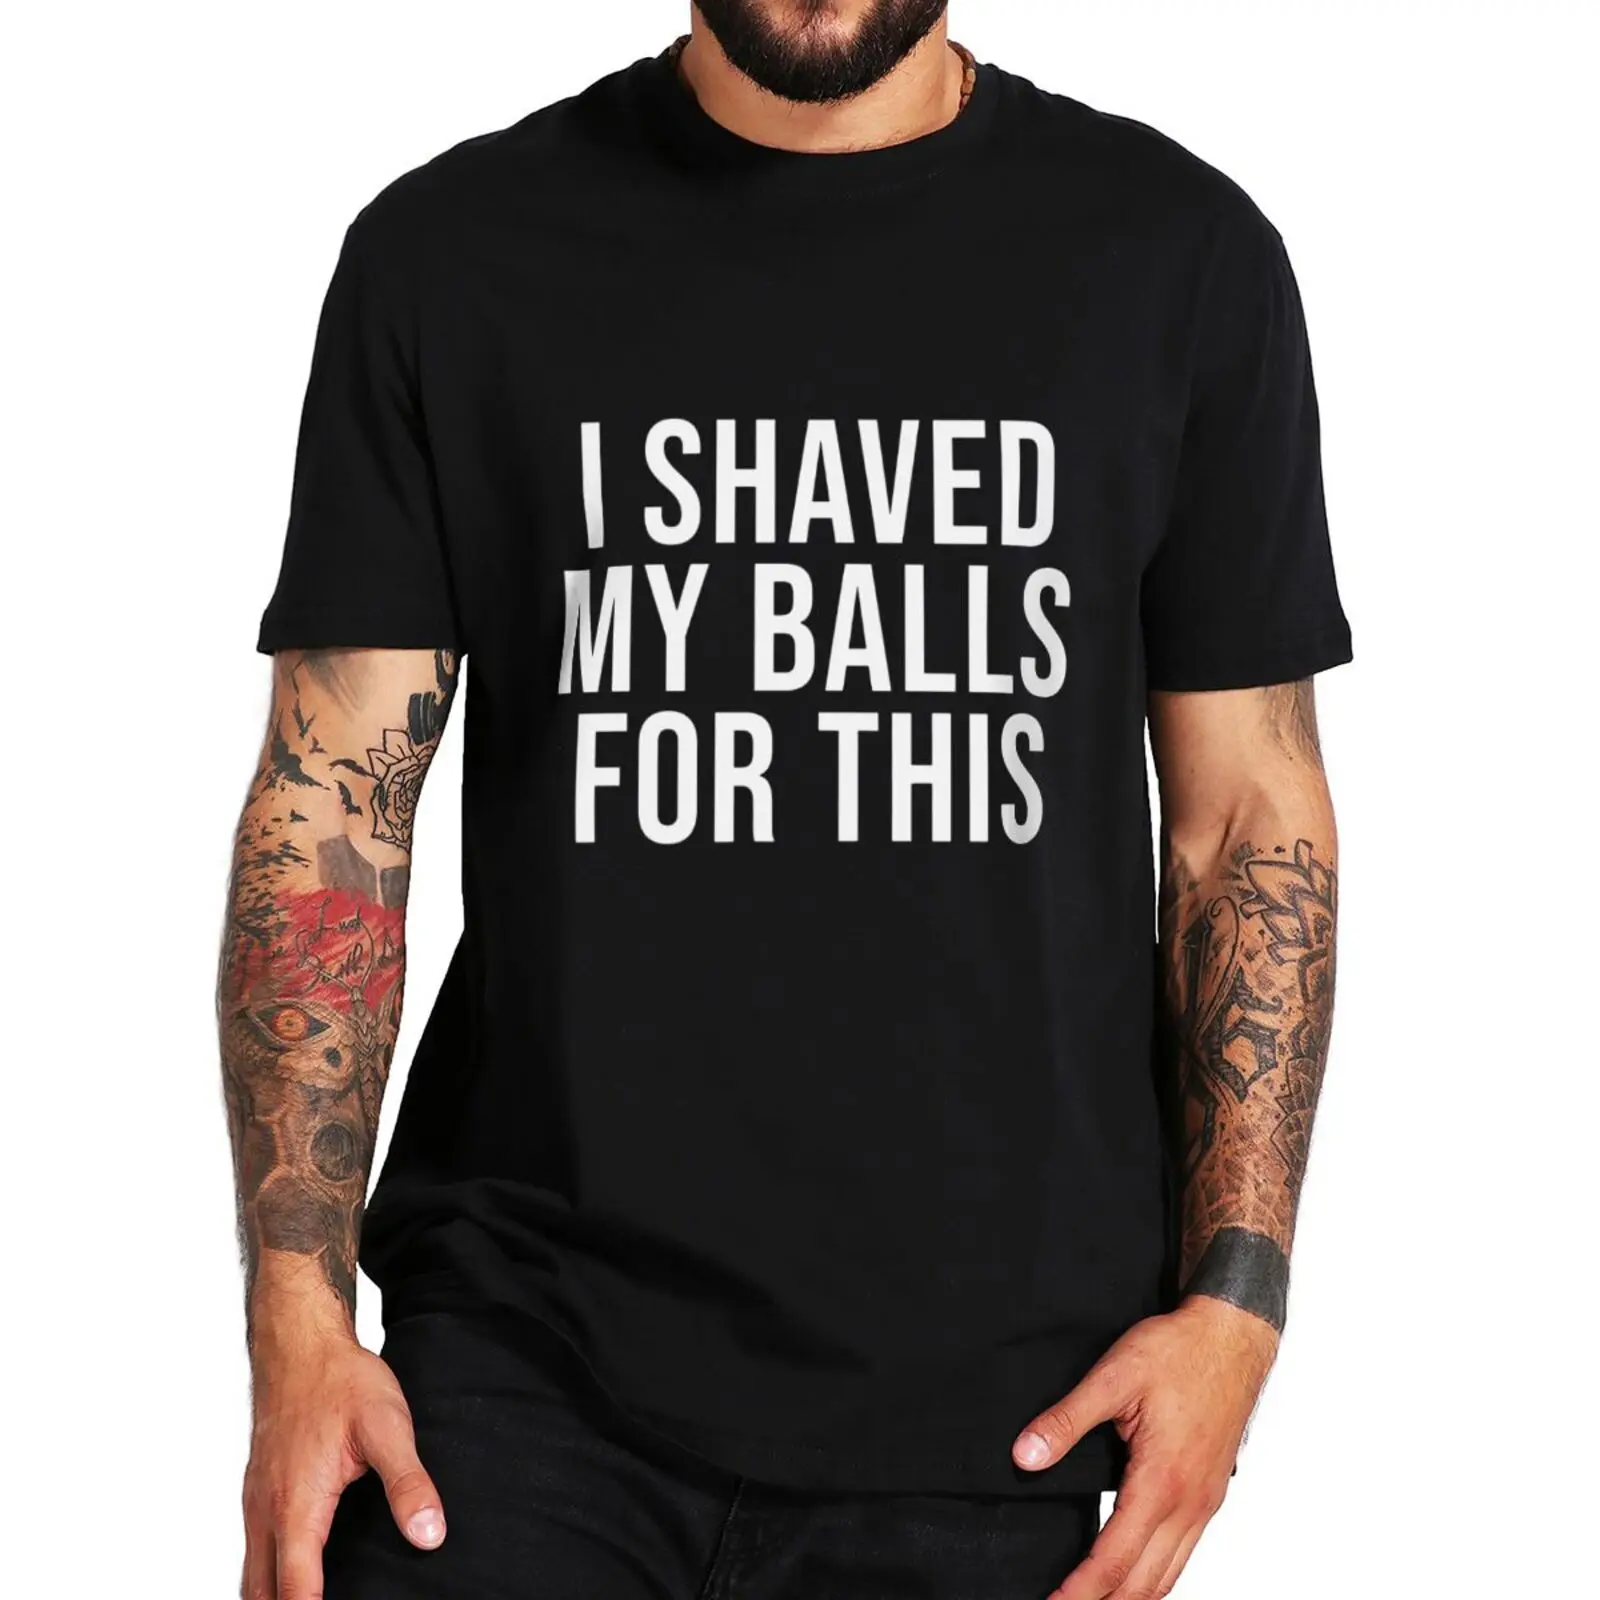 

I Shaved My Balls For This T Shirt Funny Jokes Pun Adult Humor Men Clothing Summer 100% Cotton Unisex Casual Tee Tops EU Size